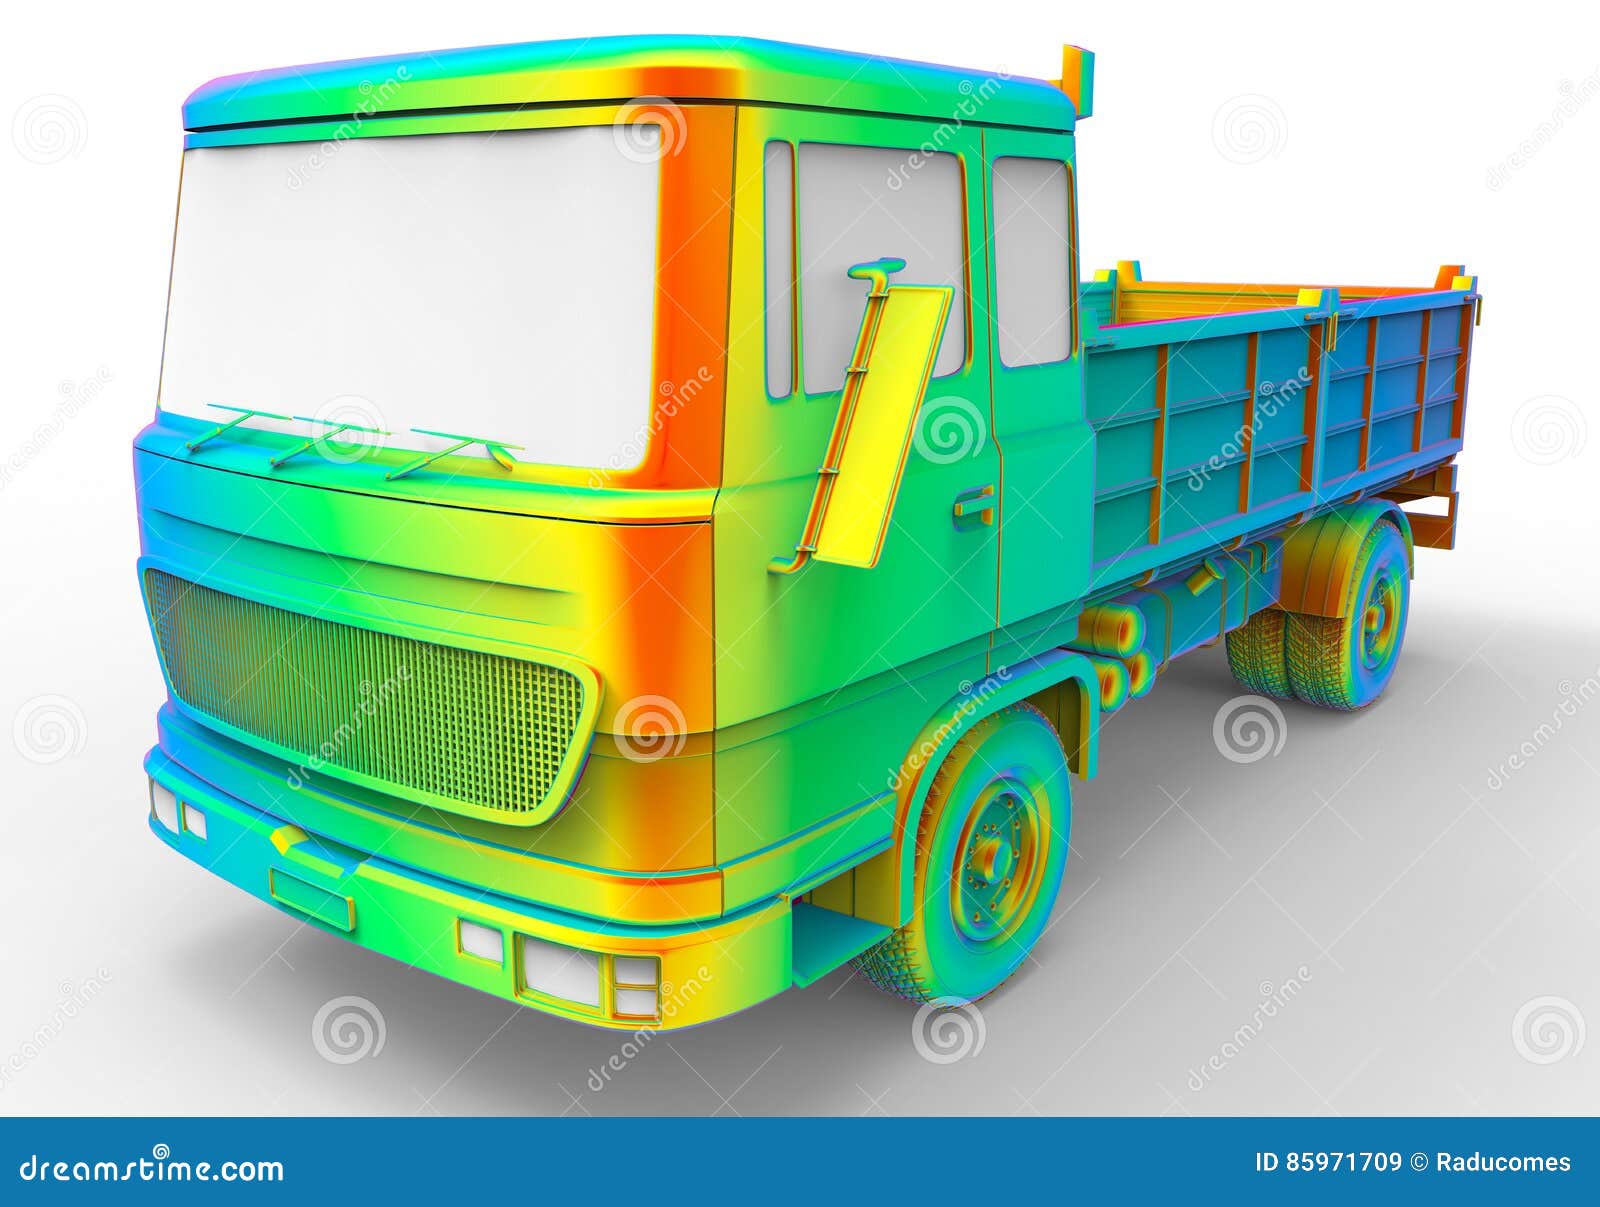 https://thumbs.dreamstime.com/z/truck-rainbow-colored-d-render-illustration-multiple-colors-object-isolated-white-background-shadows-85971709.jpg